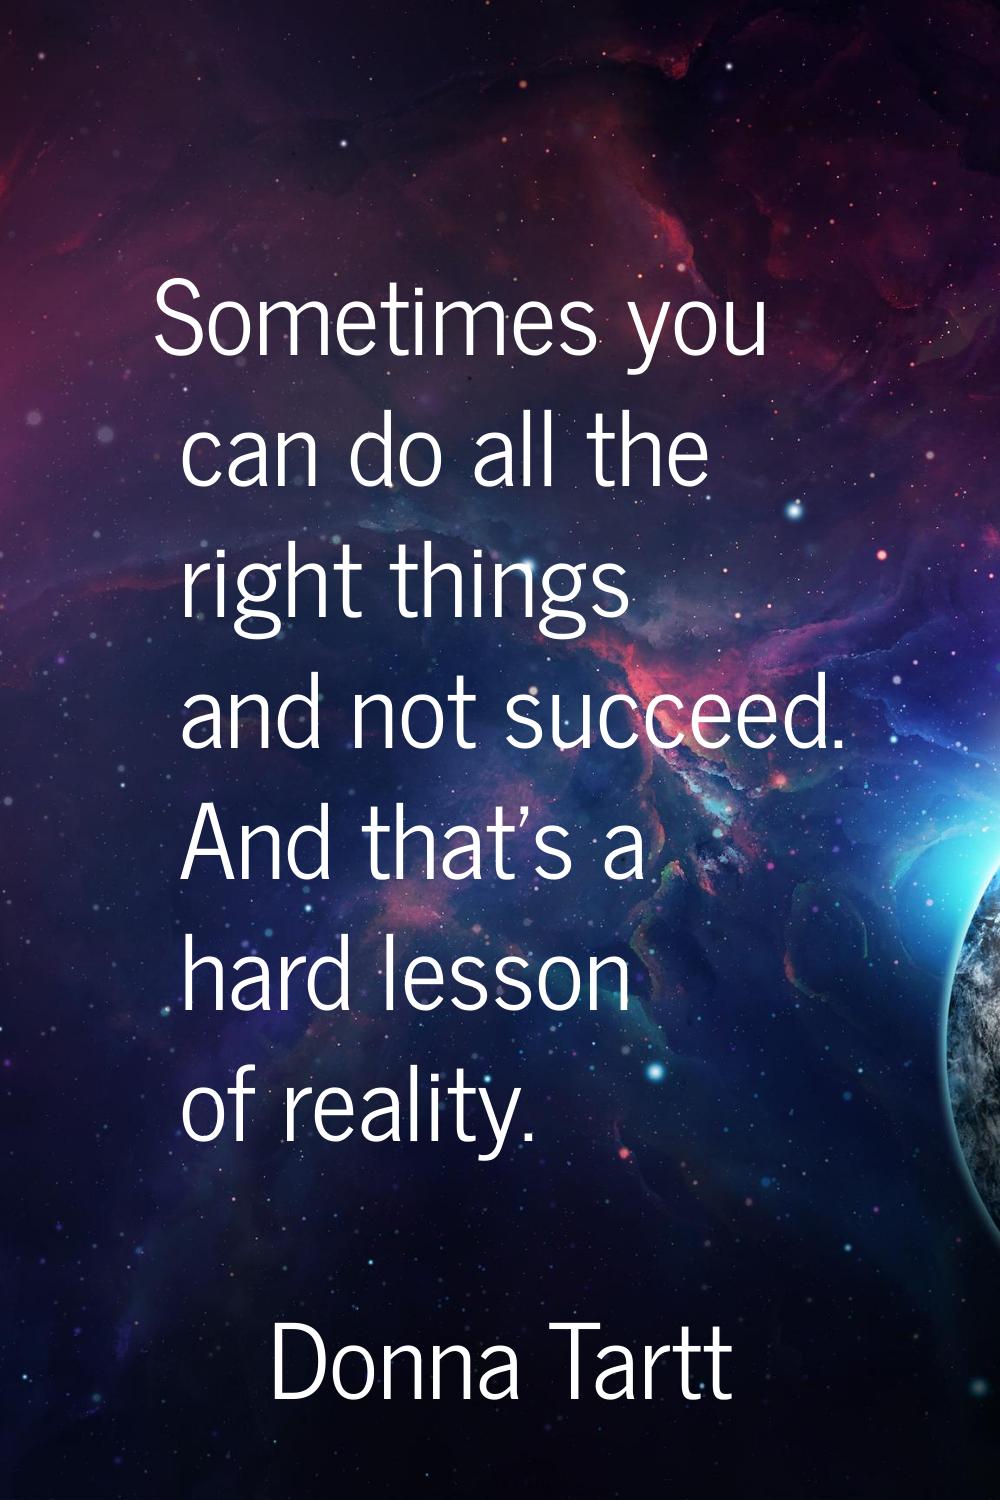 Sometimes you can do all the right things and not succeed. And that's a hard lesson of reality.